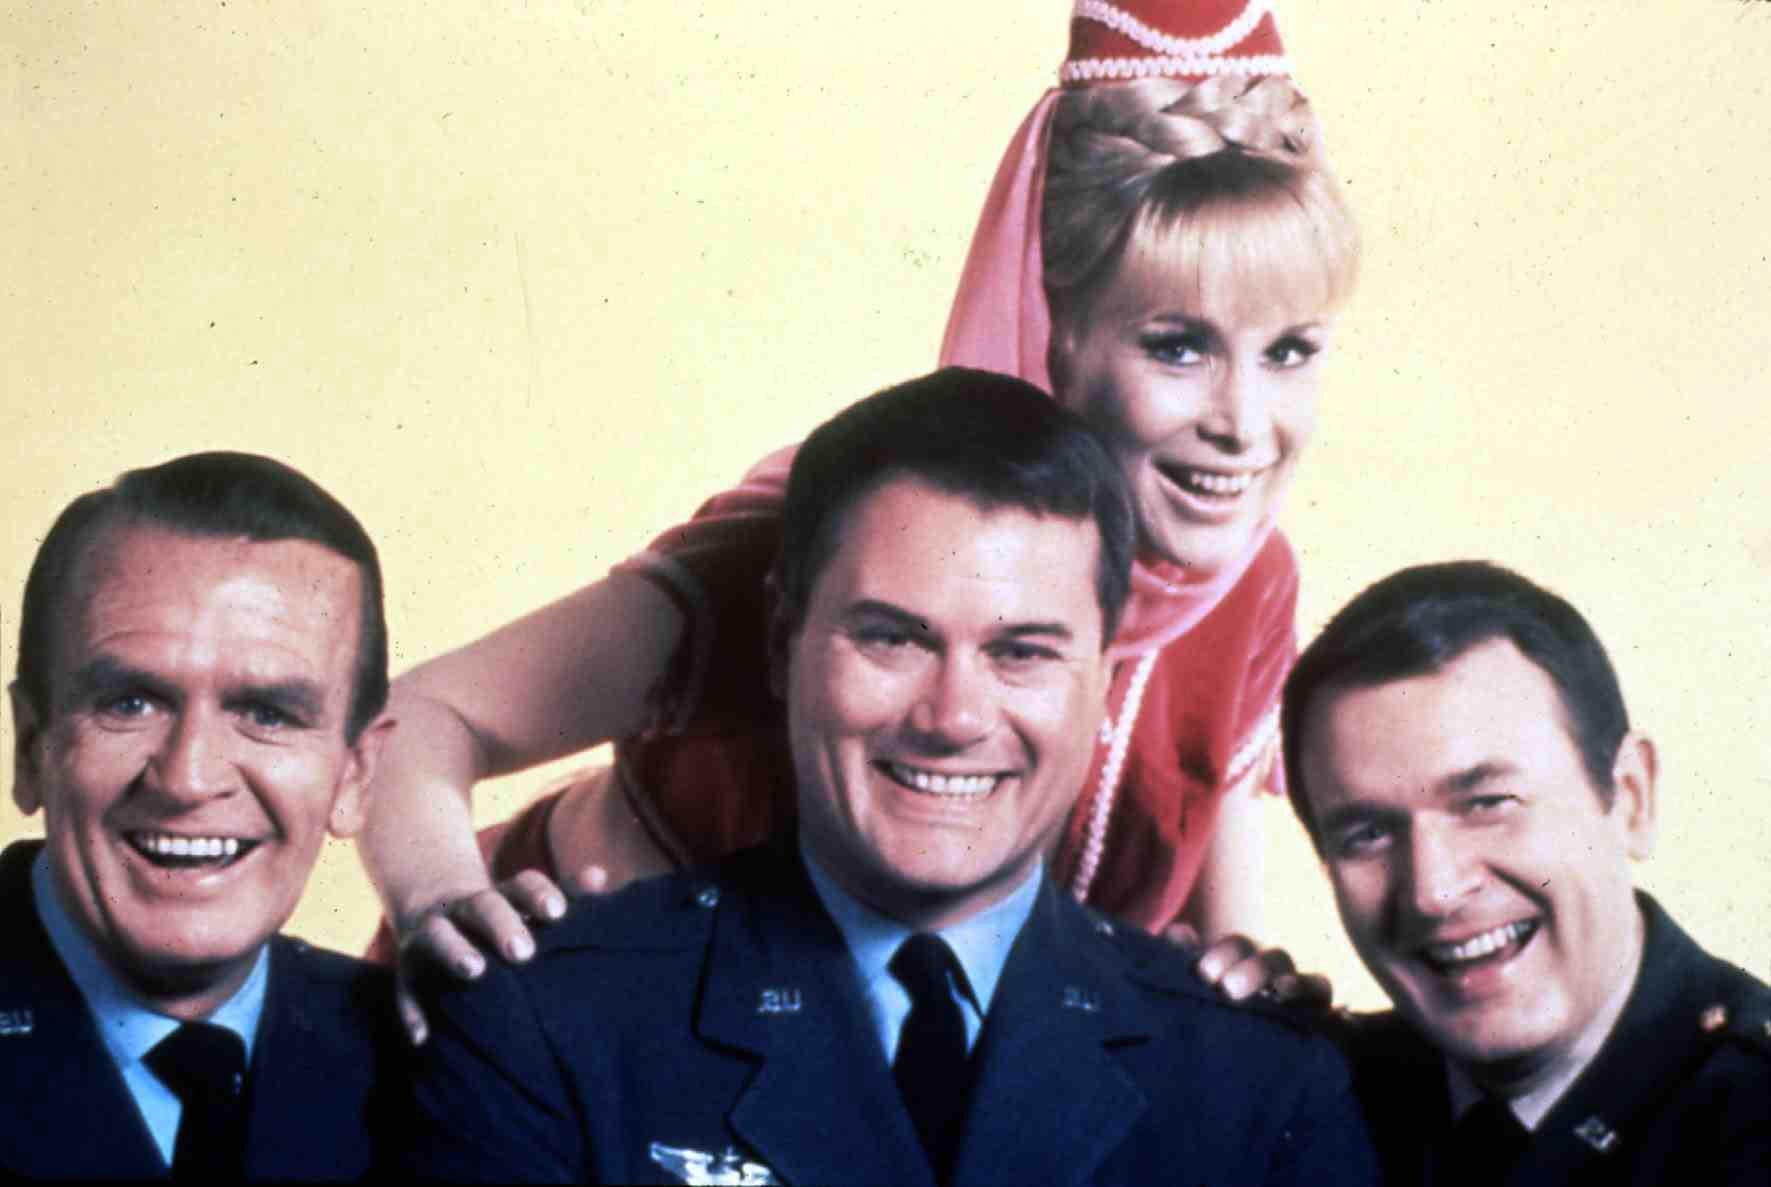 Are Any of the ‘I Dream of Jeannie’ Cast Members Still Alive Today?